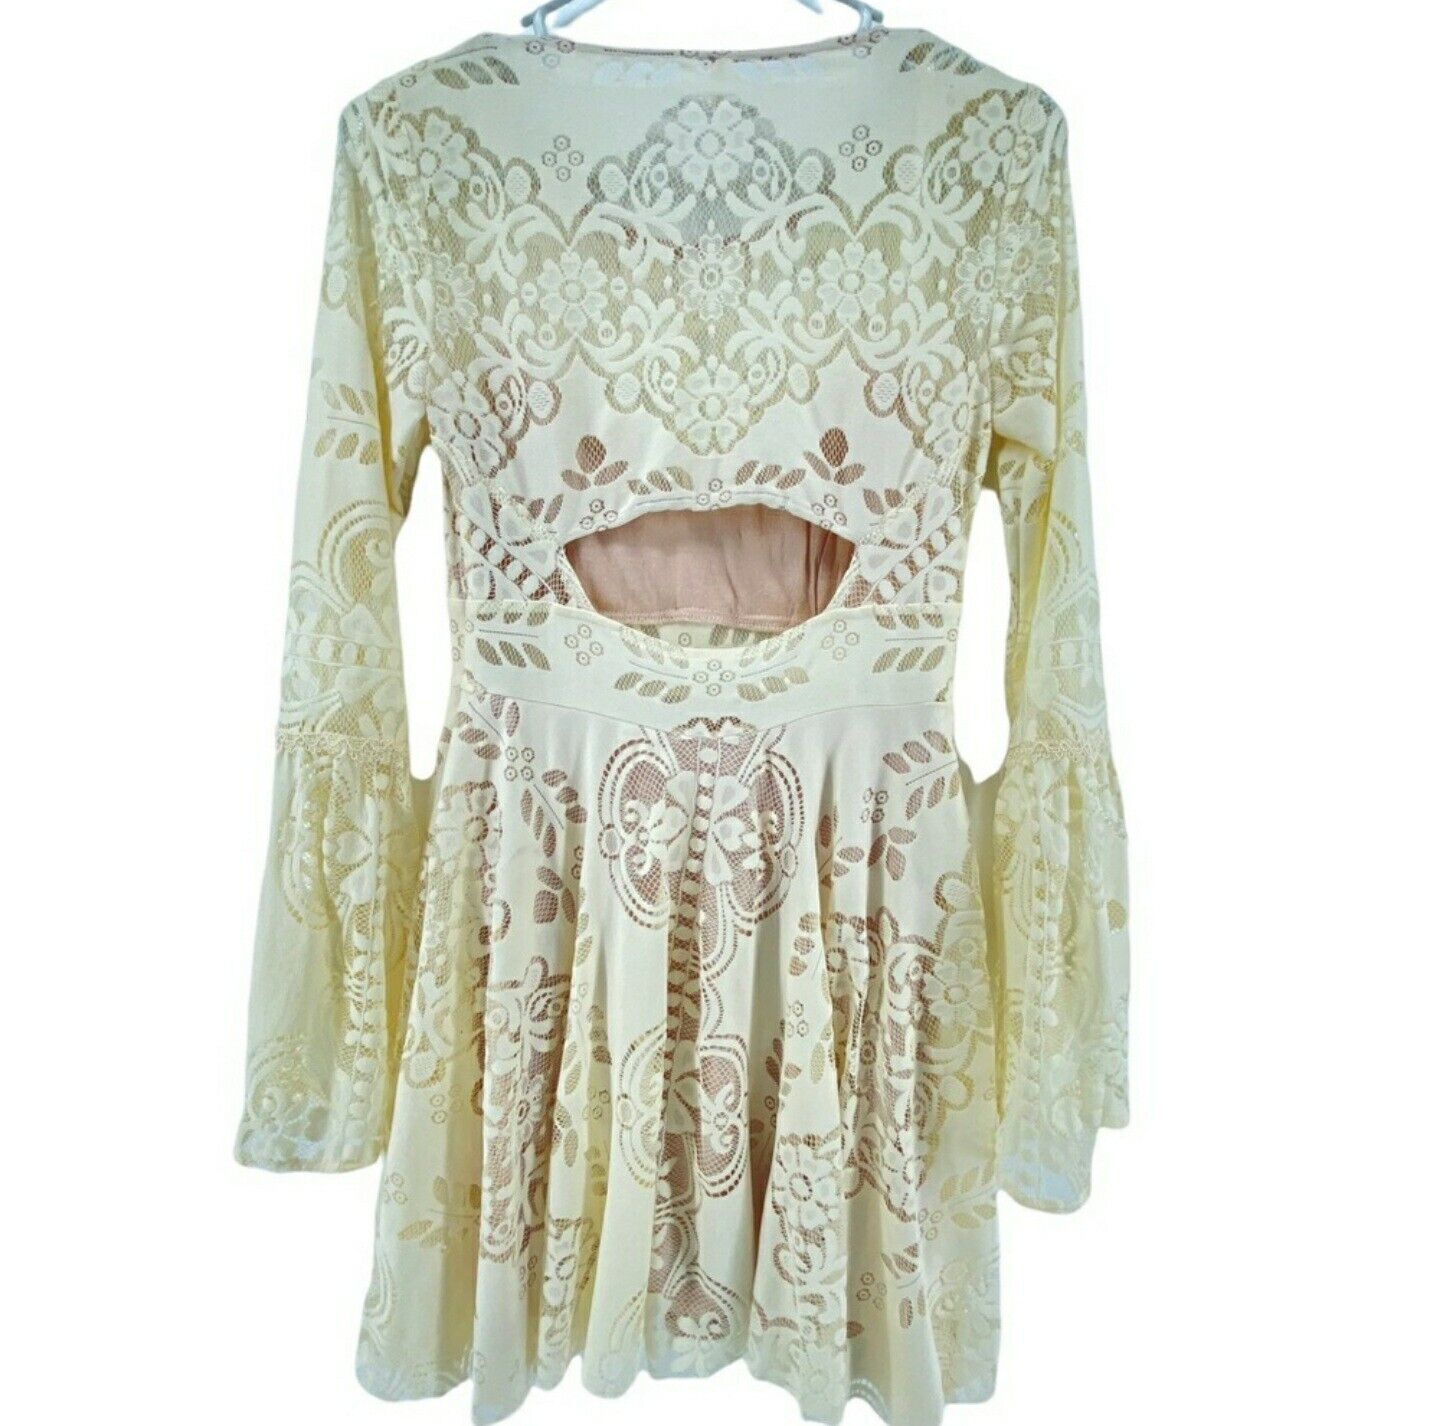 FREE PEOPLE Lover's Folk Song Cream lace Bell Sle… - image 5